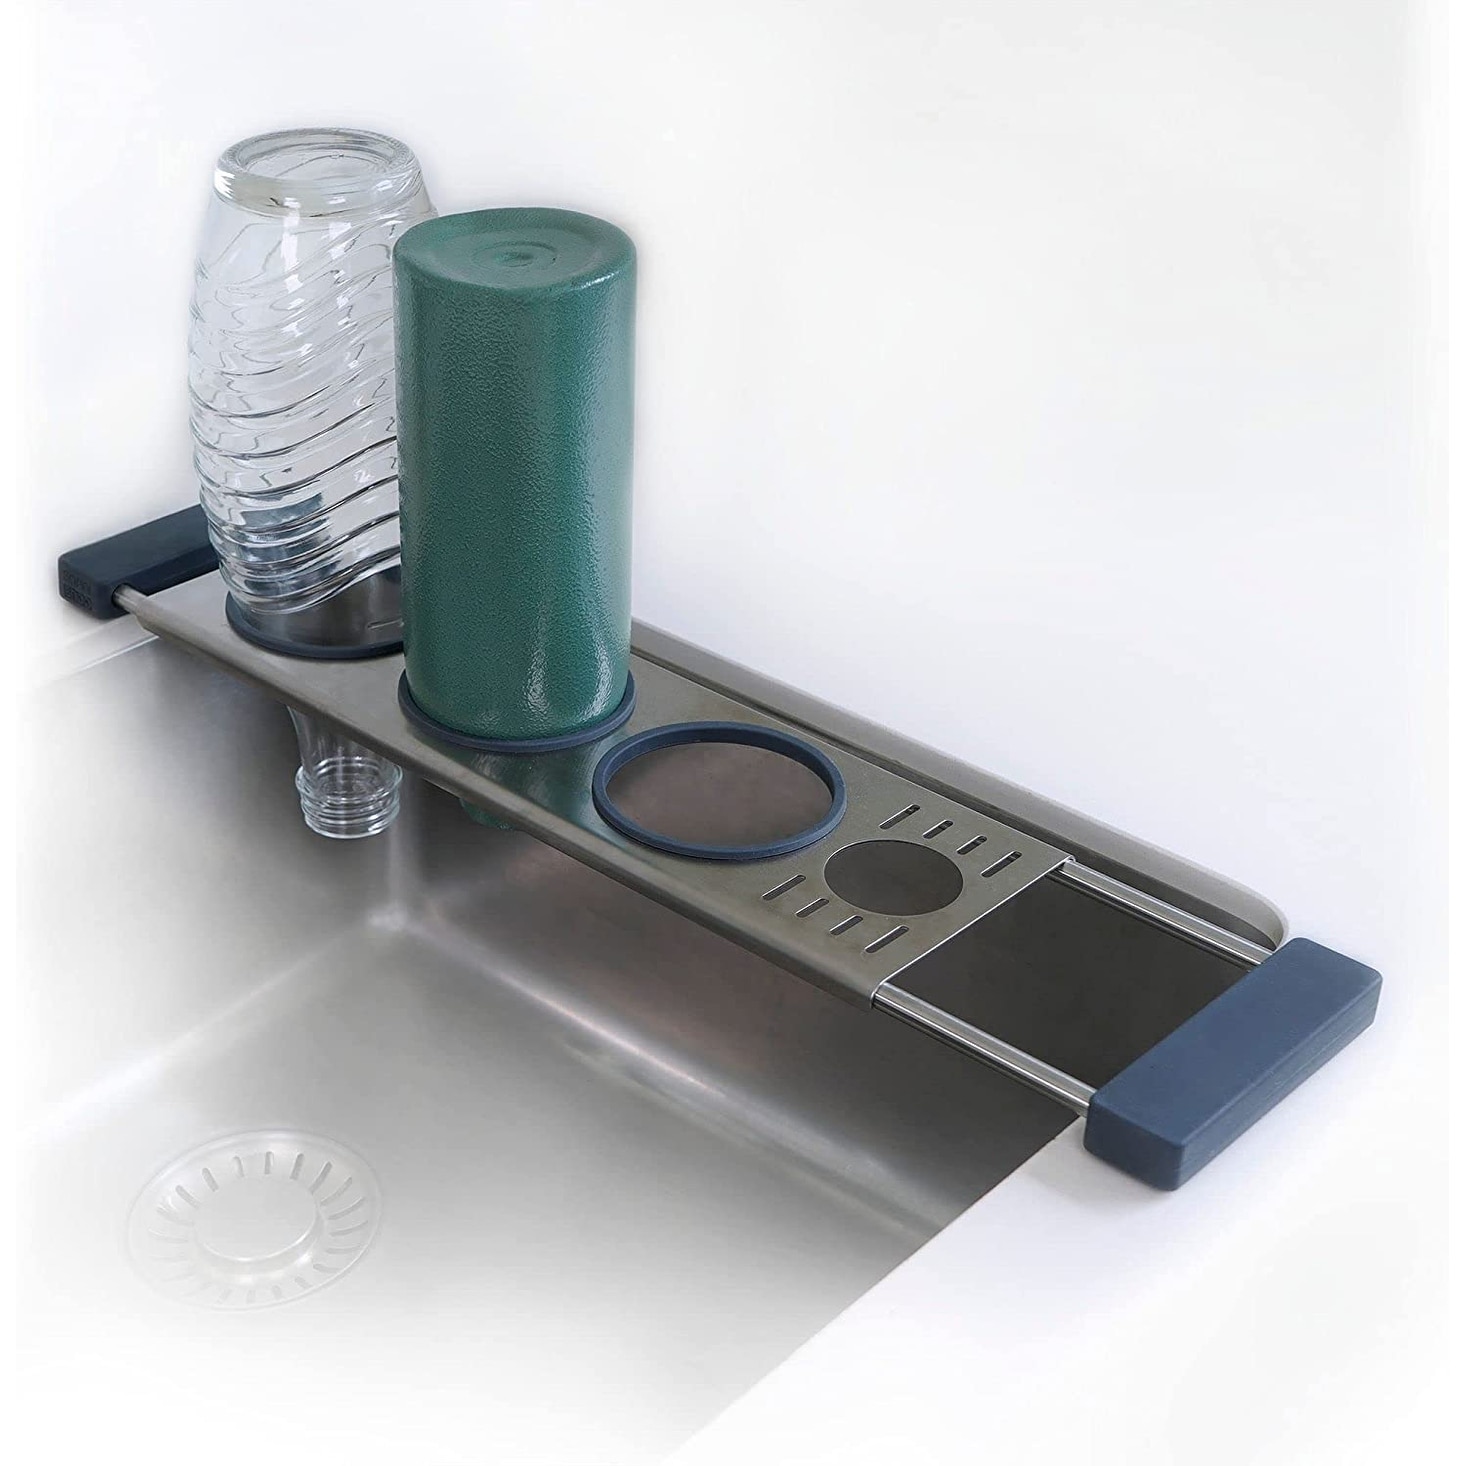  OXO Good Grips Stainless Steel Sink Caddy, Gray